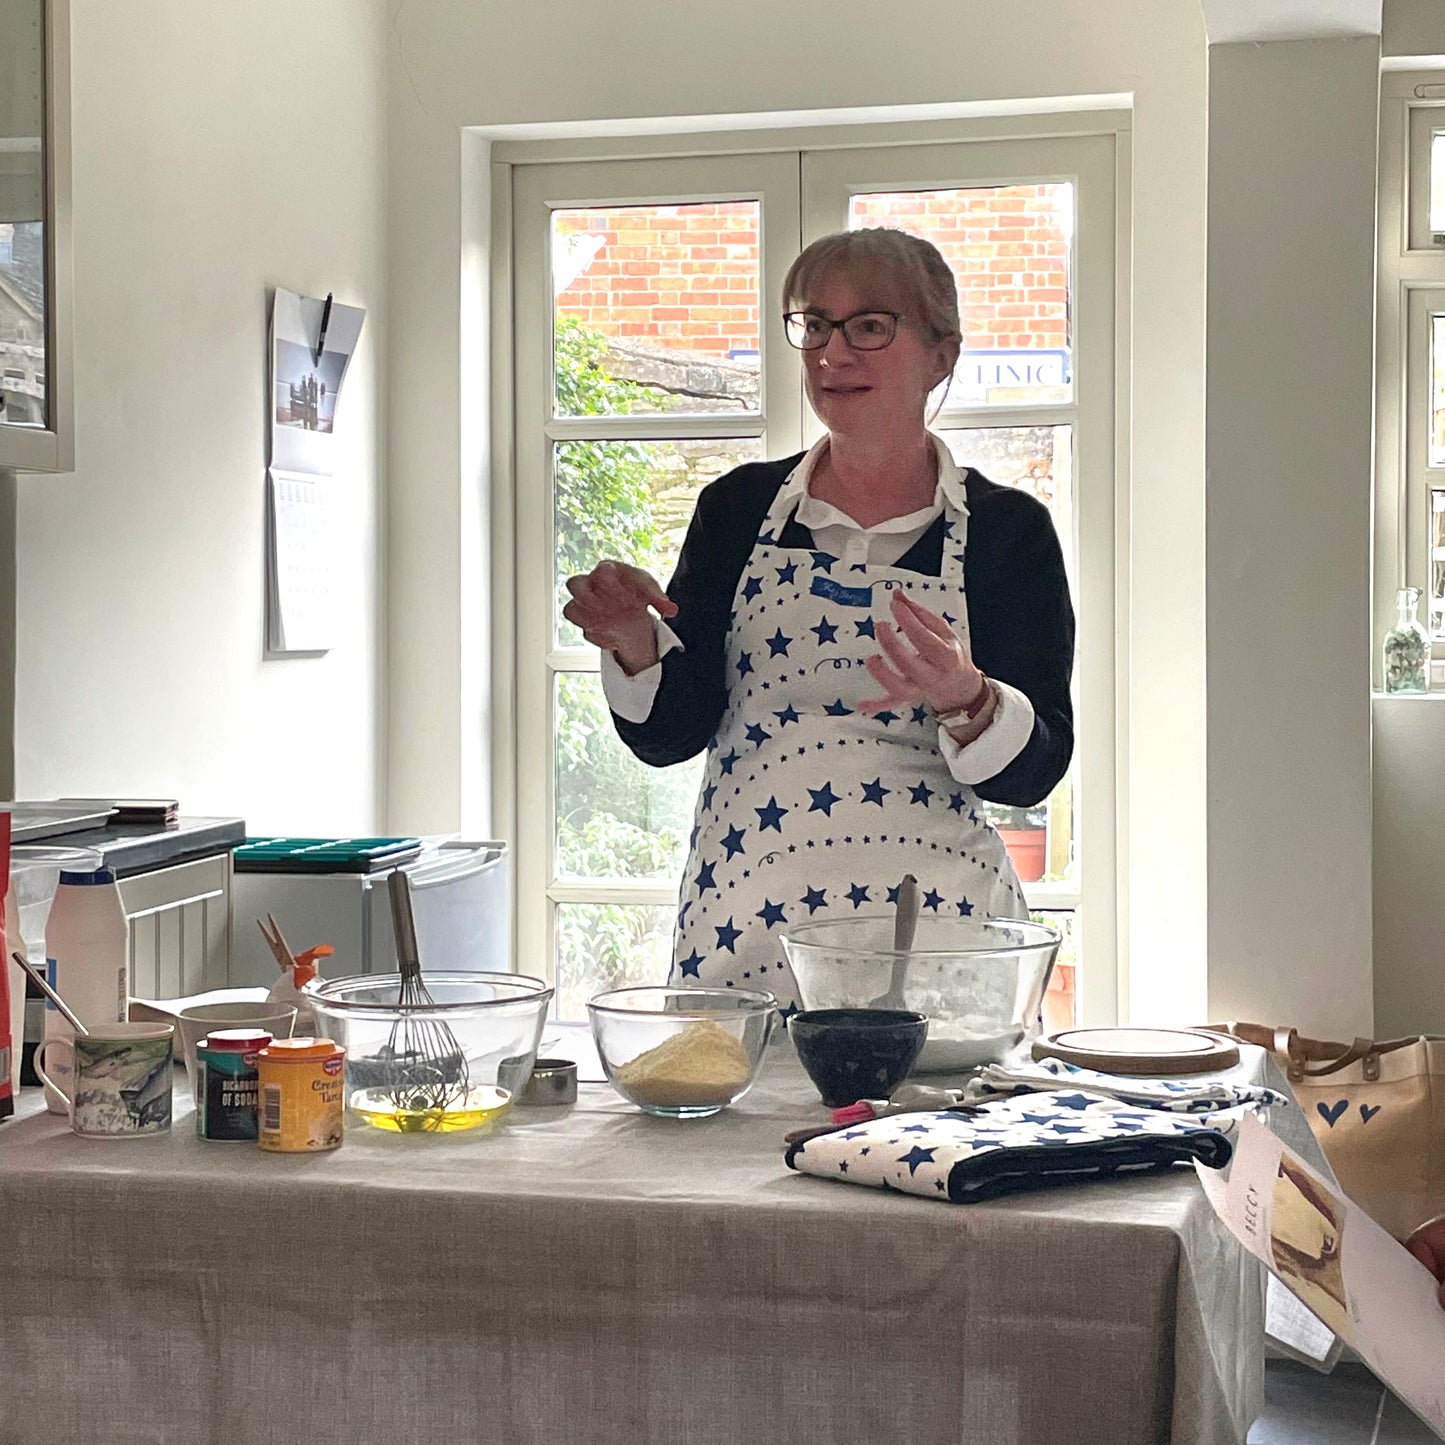 Cook Beccy standing at a table mid baking demonstration